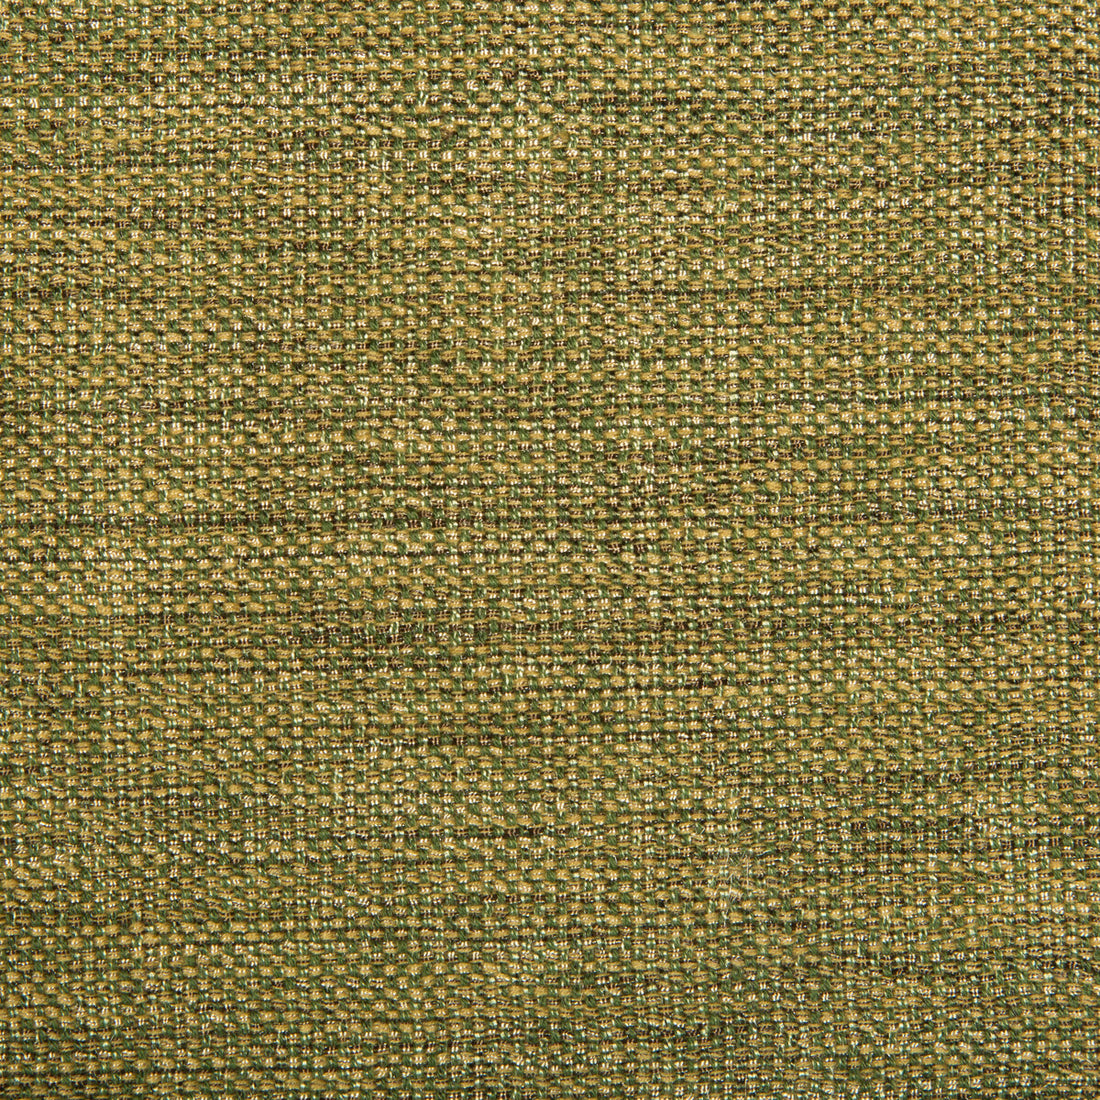 Kravet Contract fabric in 4458-314 color - pattern 4458.314.0 - by Kravet Contract